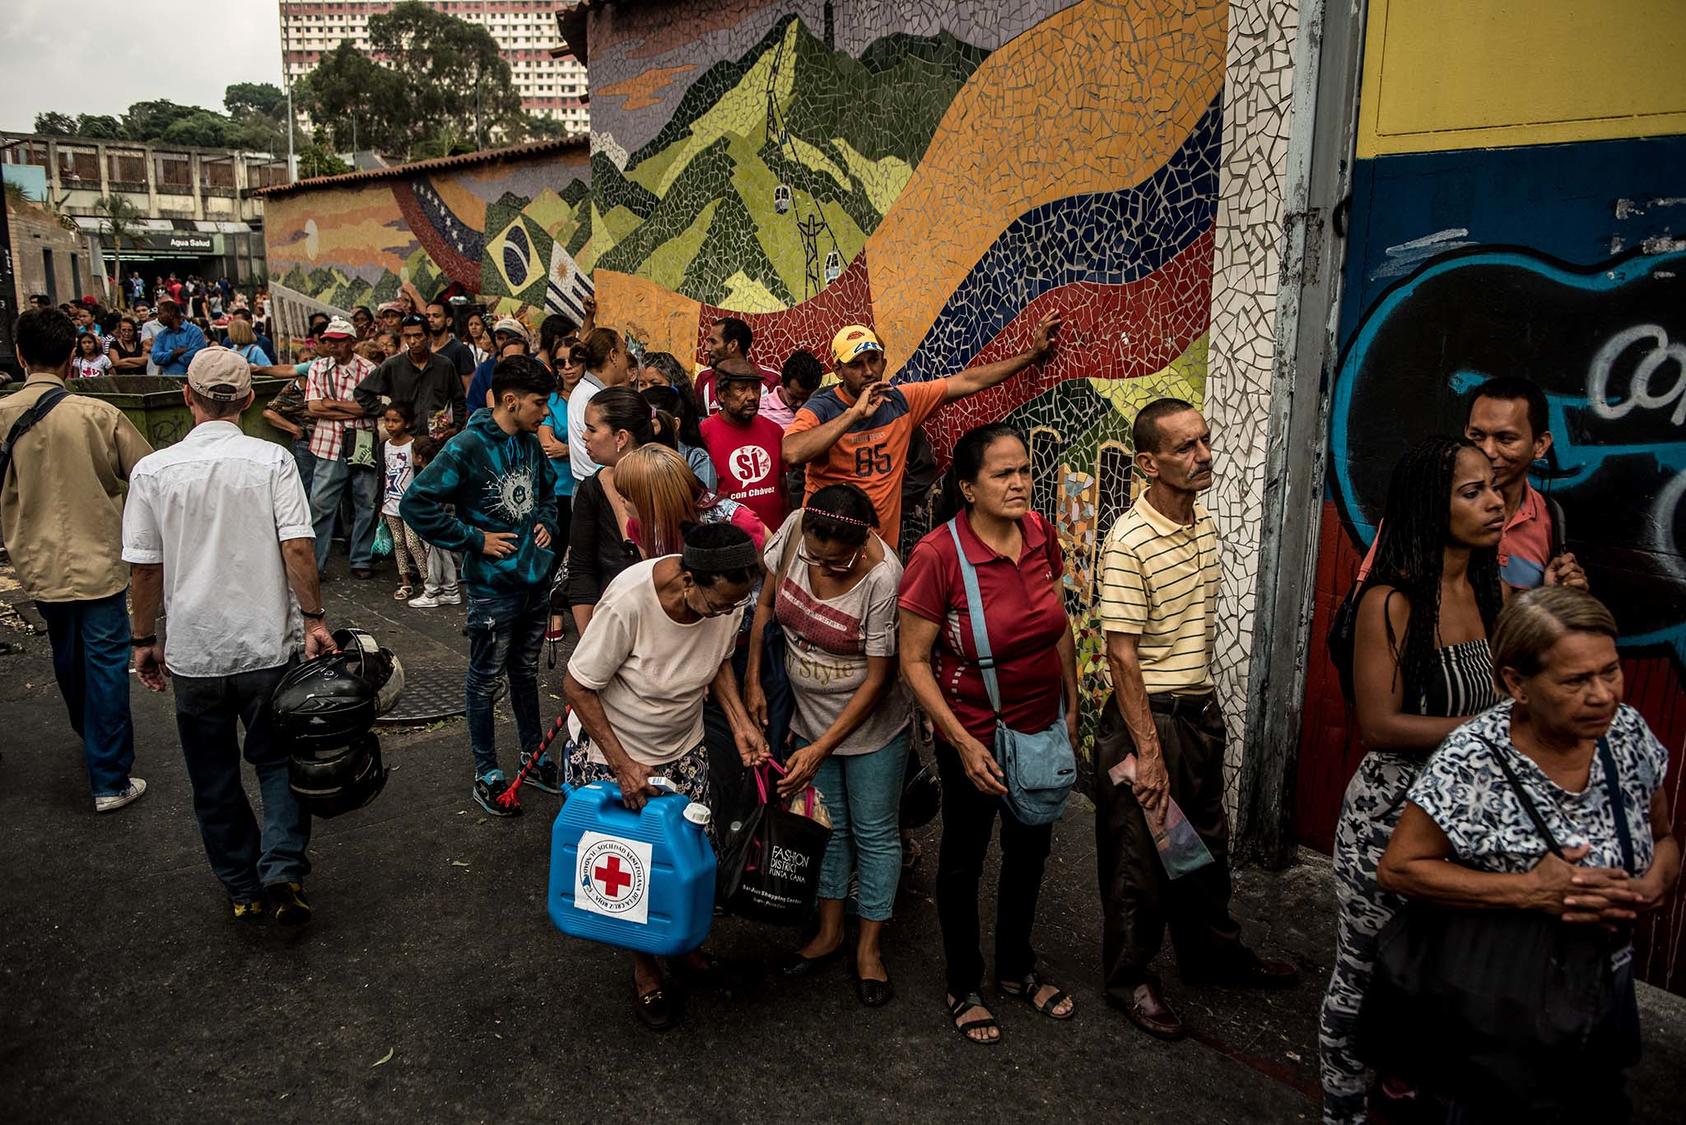 People wait in line as Red Cross workers distributed water containers and potable water purification tablets in Caracas, Venezuela, April 16, 2019. (Meridith Kohut/The New York Times)